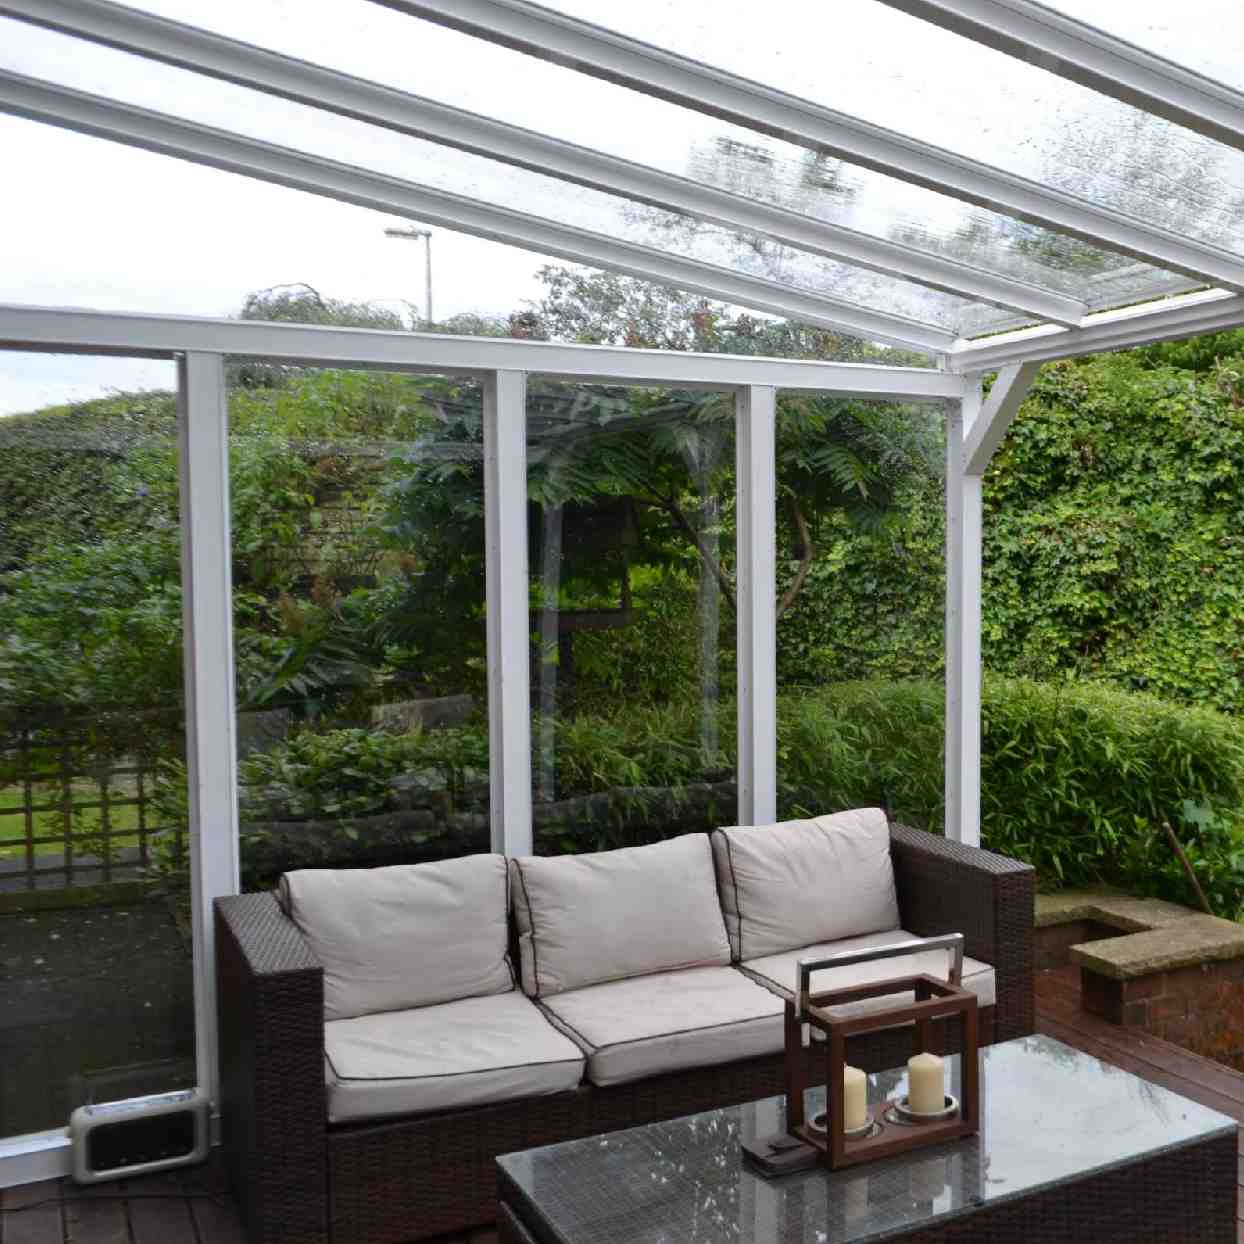 Buy Omega Verandah White with 16mm Polycarbonate Glazing - 4.2m (W) x 1.5m (P), (3) Supporting Posts online today